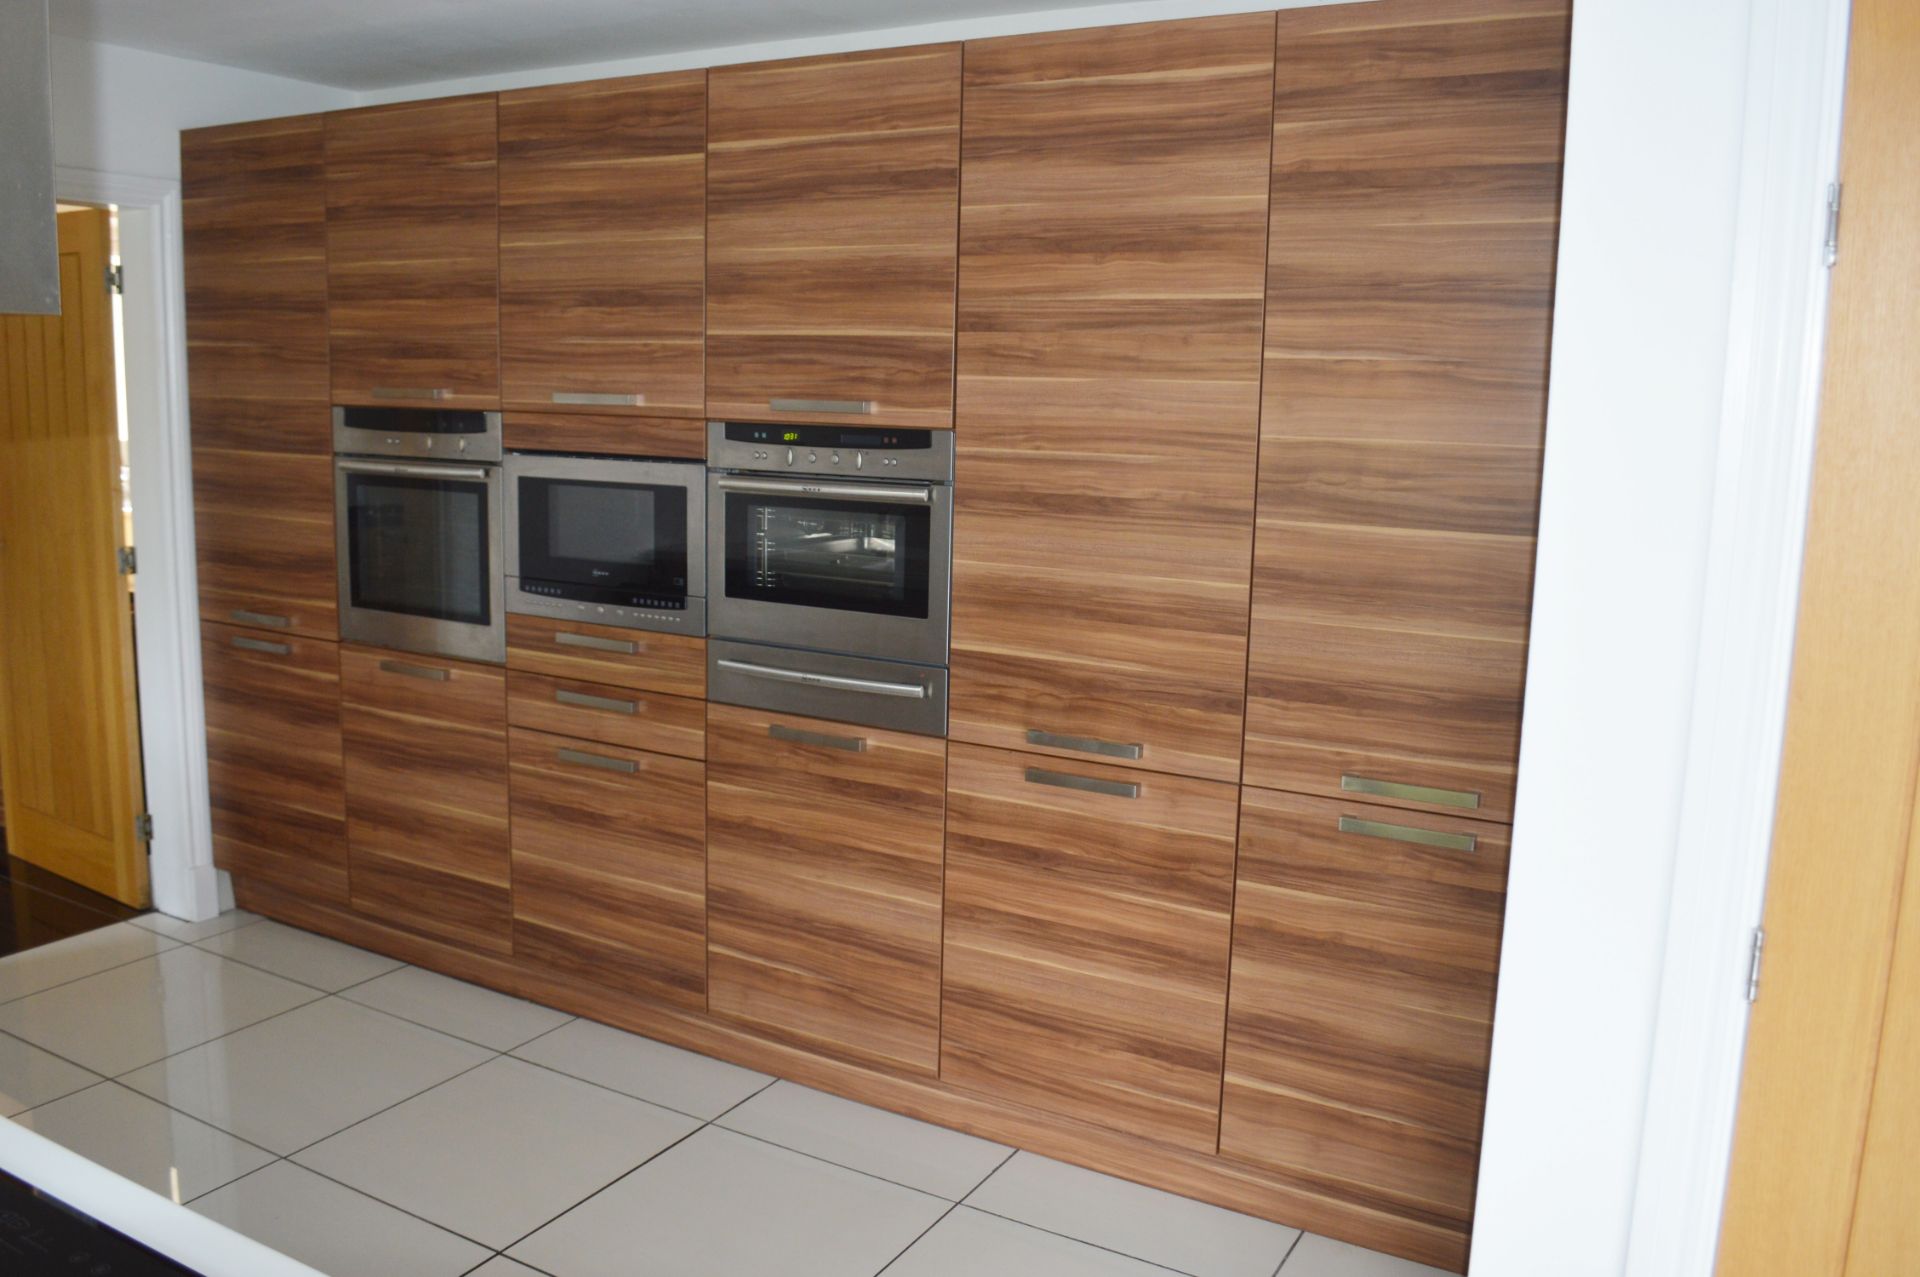 1 x Contemporary Bespoke Fitted Kitchen And Utilty Room  With Integrated Neff Branded Appliances, - Image 2 of 32